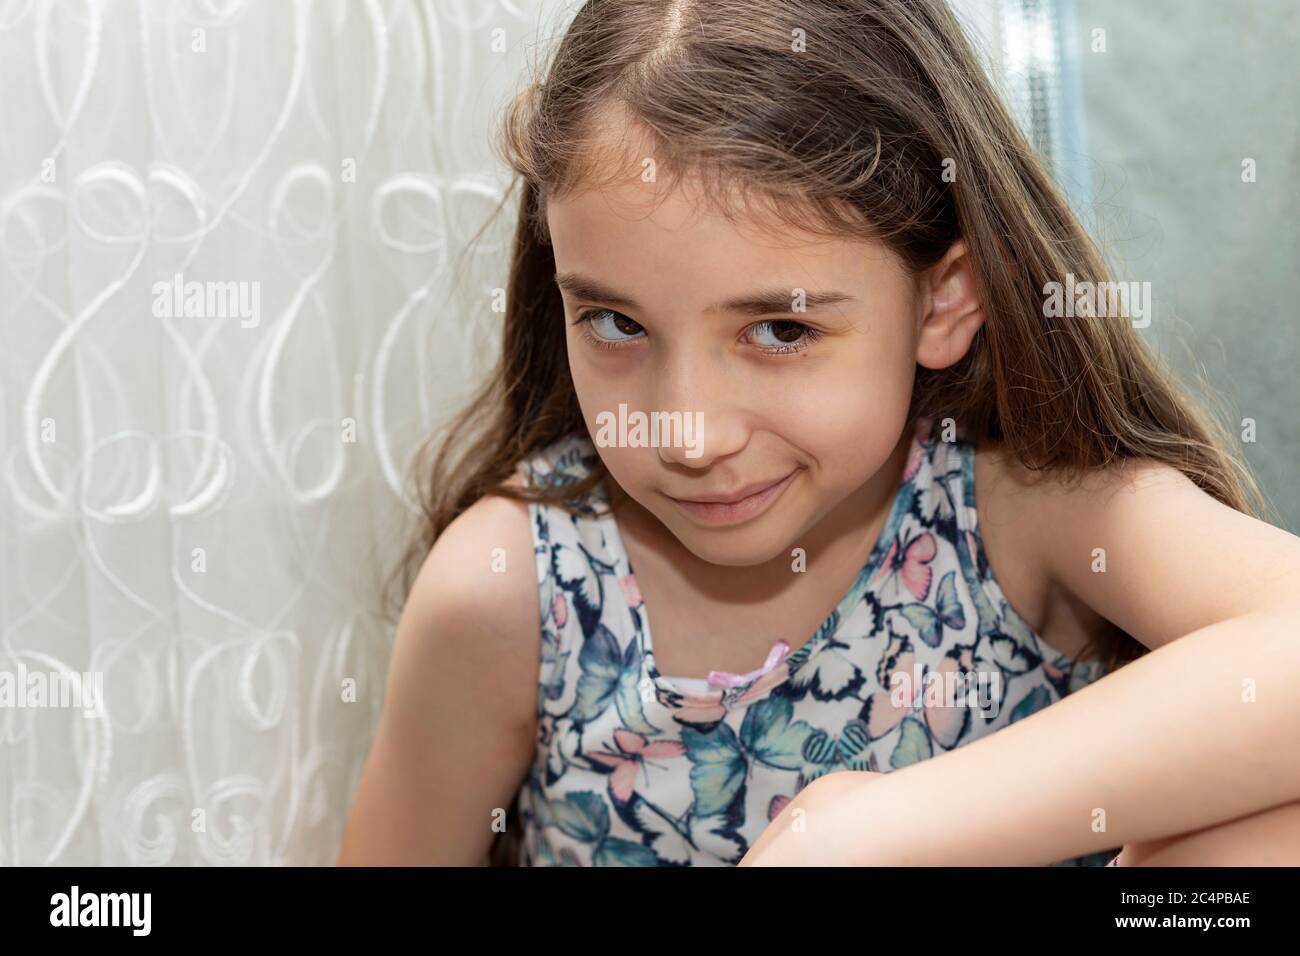 A little girl looking suspicious. The blonde girl with long hair takes a sceptical and suspicious-looking in front of the curtain. Stock Photo